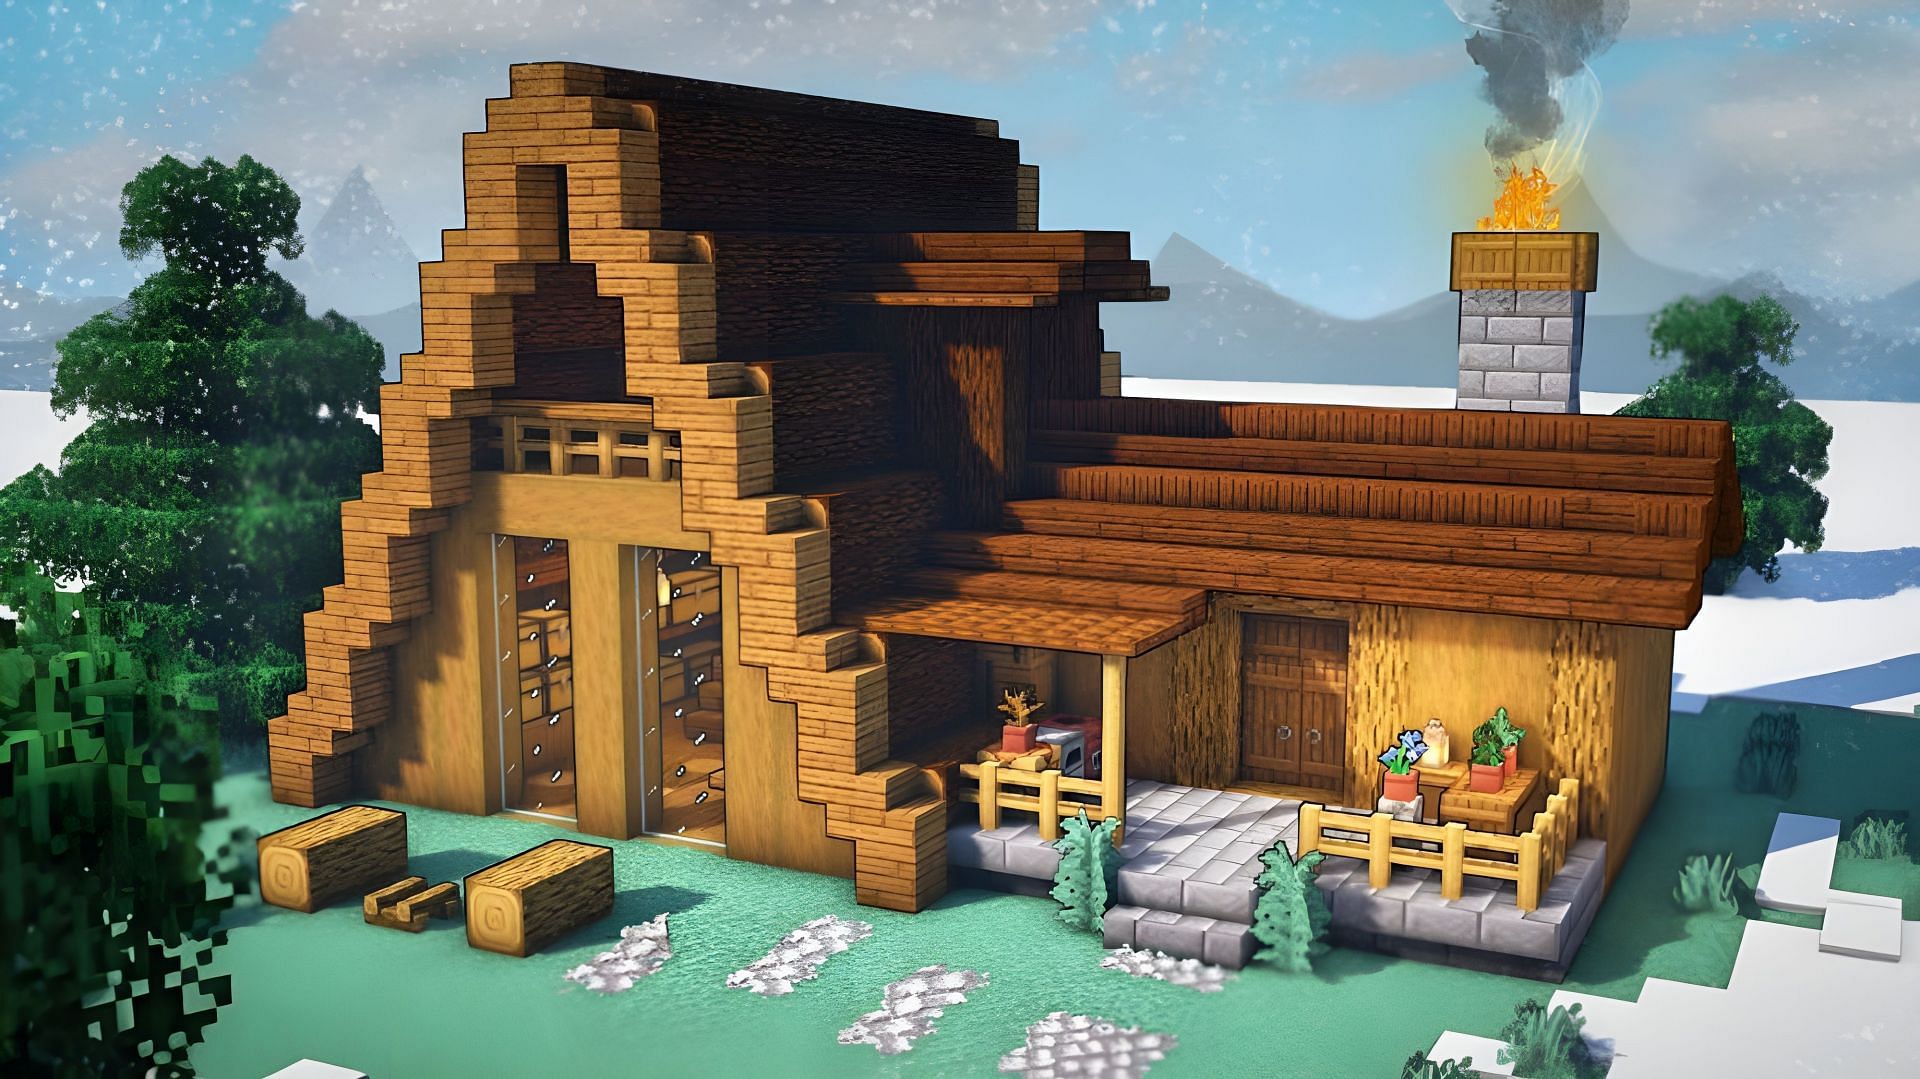 The Small Cabin (Image via YouTube/Capy Builds)